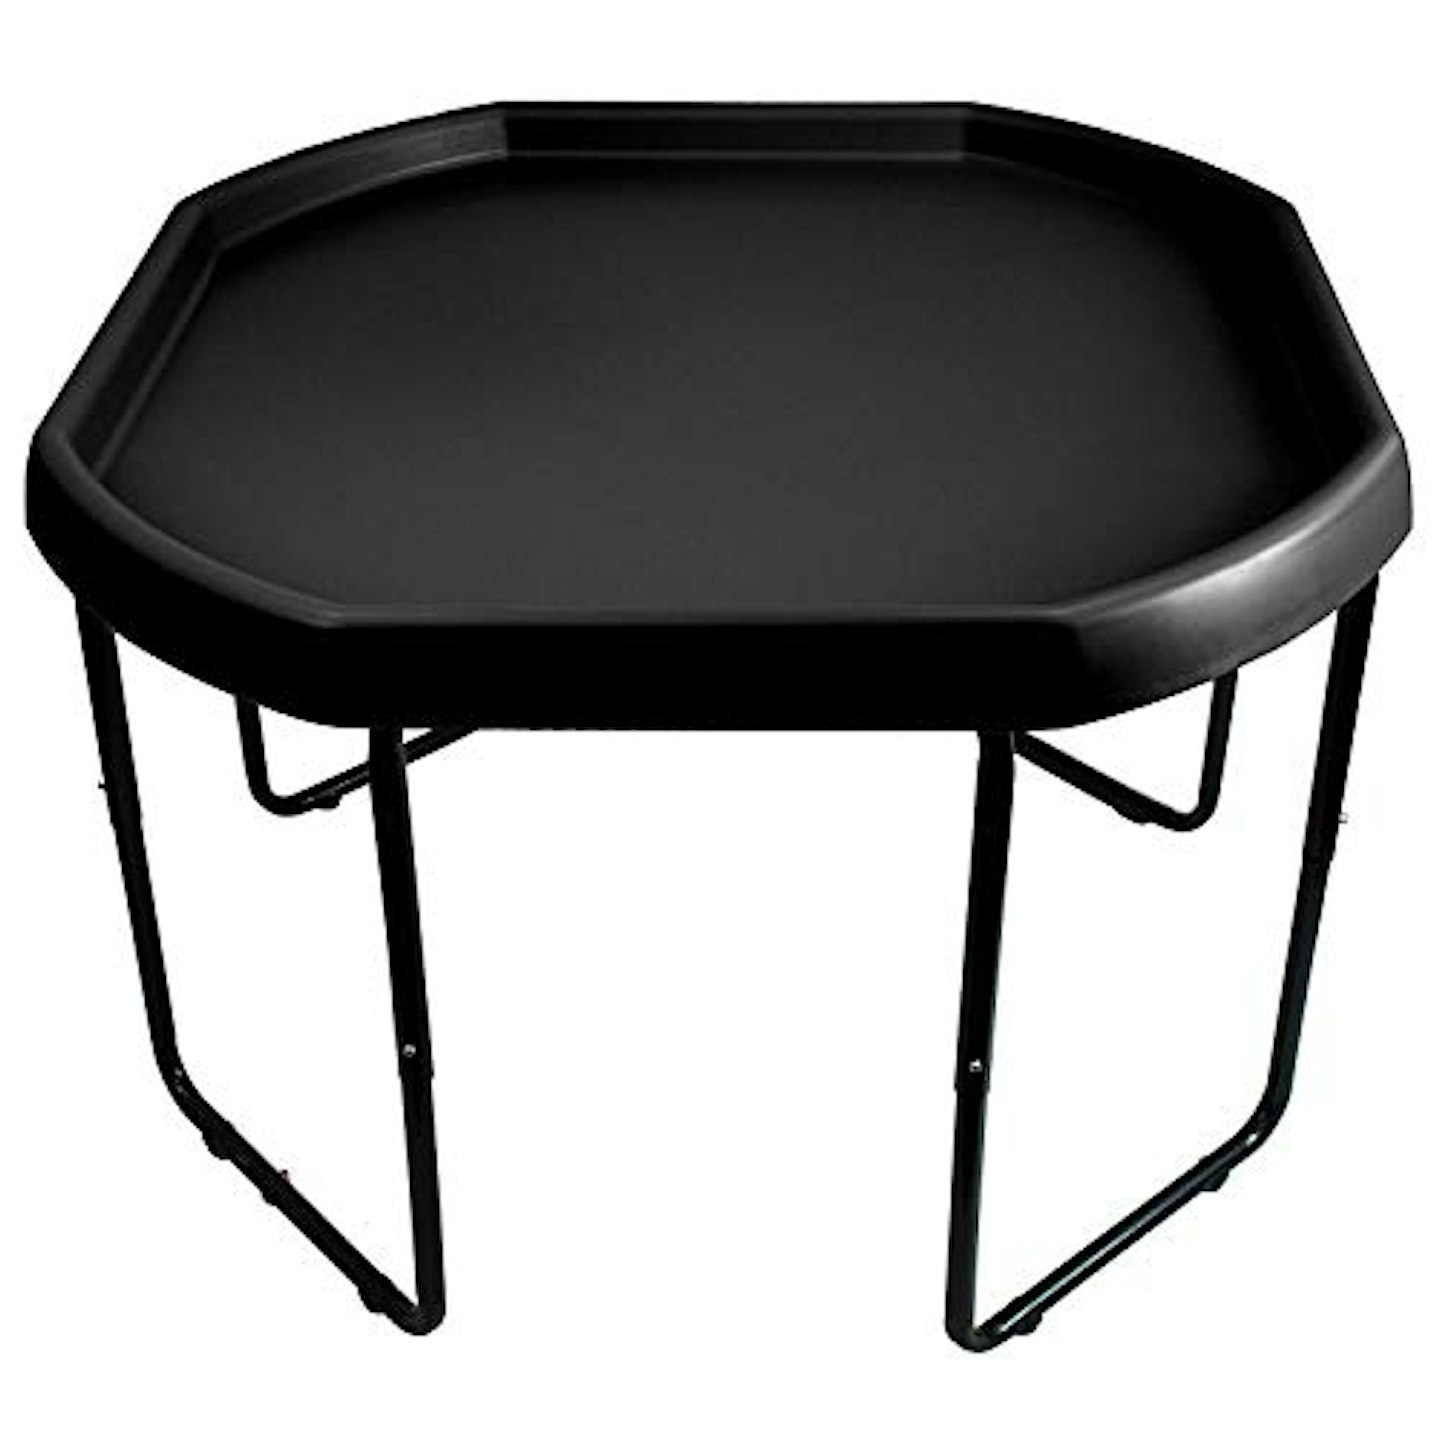 Black Tuff Spot Tray for Kids - Large Plastic Messy Play for Sand, Water  2+Years